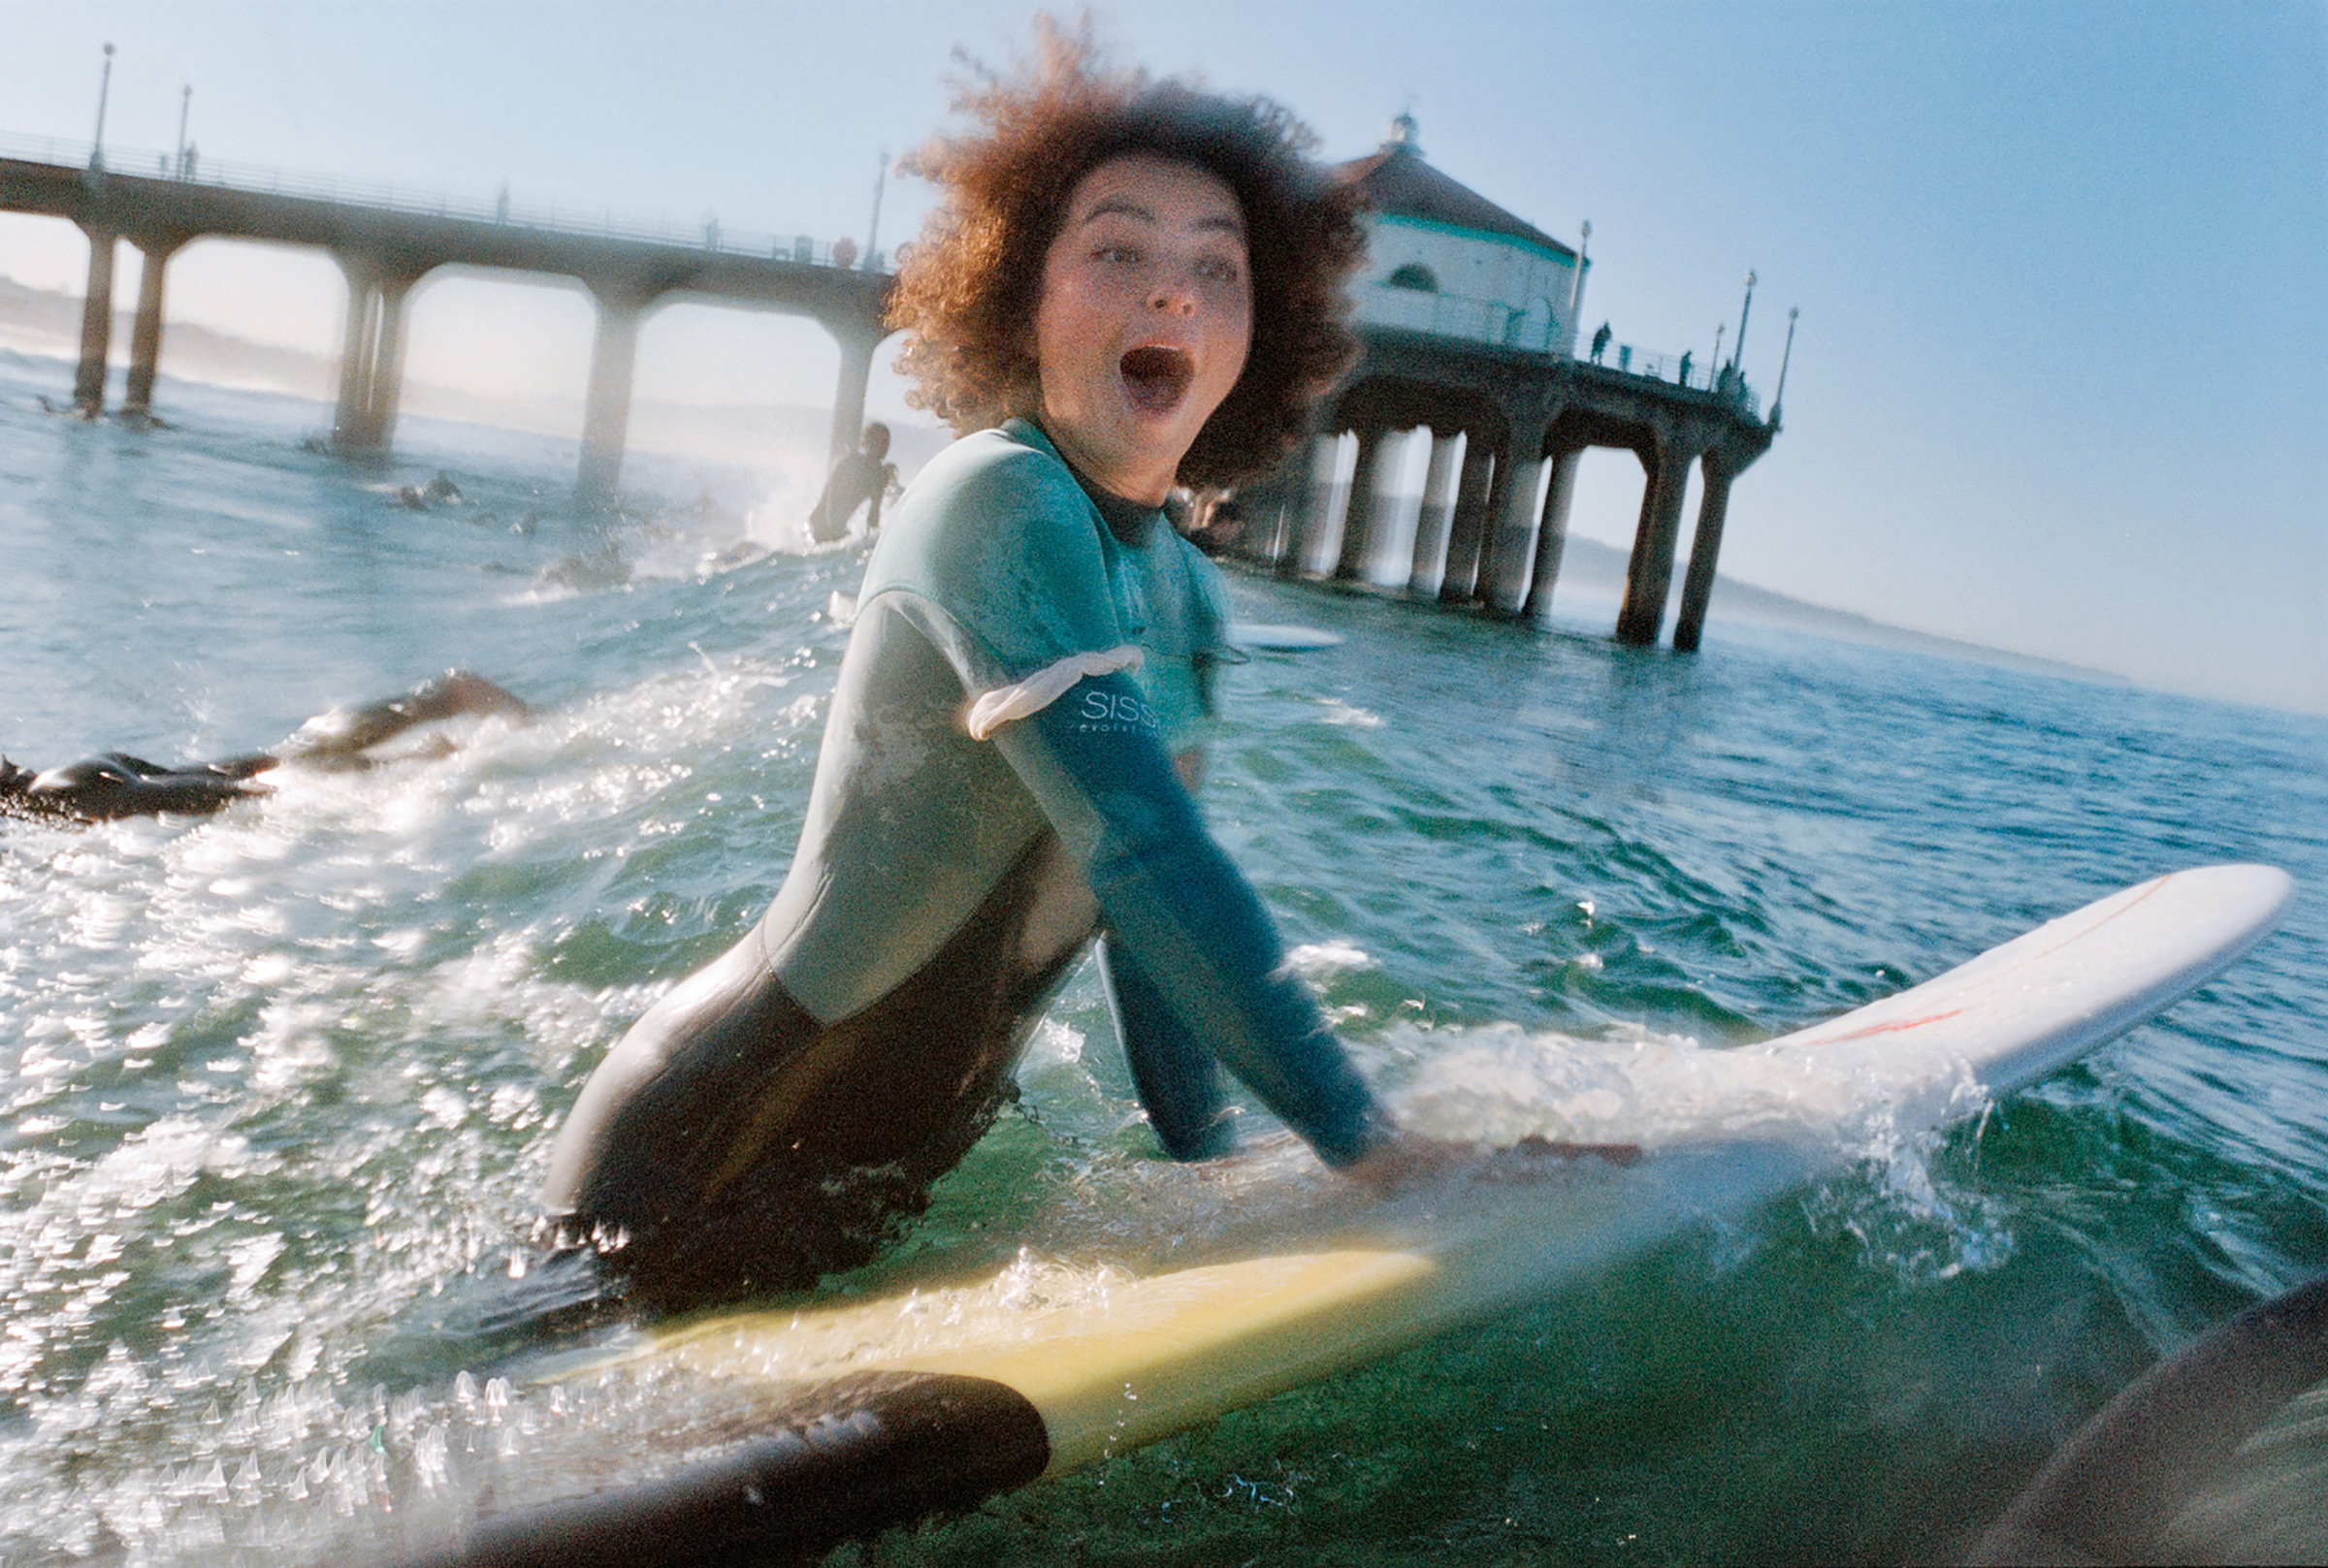 Kimiko Russell-Halterman, a surfer and waterwoman, pops up over a wave during the Black Sand paddle out near the Manhattan Beach Pier in Los Angeles, Feb. 2021.